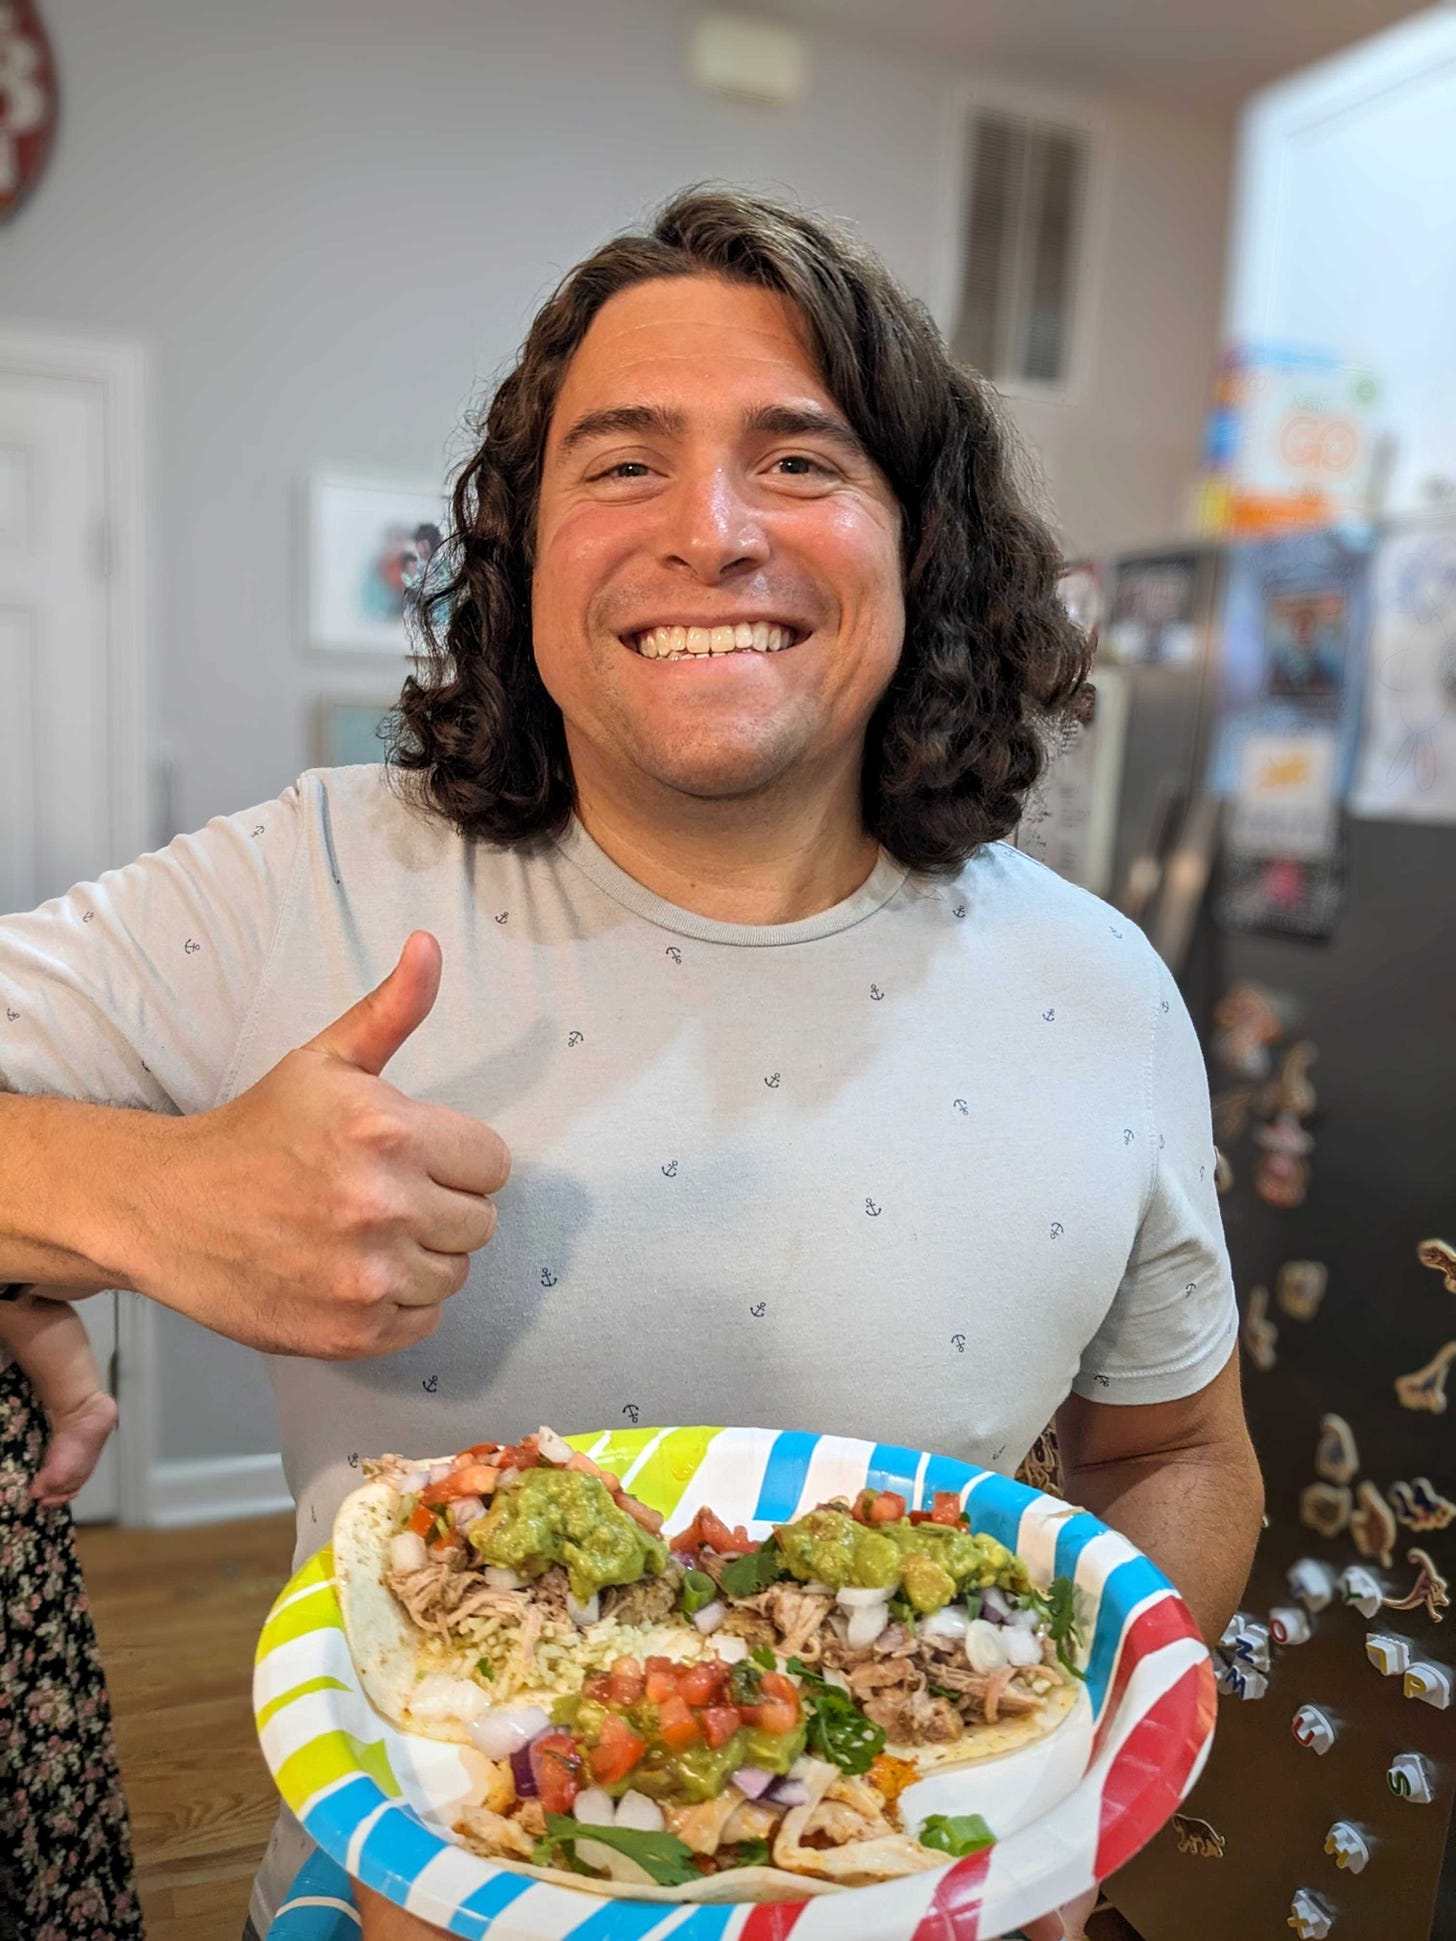 a white man with shoulder-length brown hair and a blue shirt holds a plate of tacos, grinning ear-to-ear and giving thumbs up